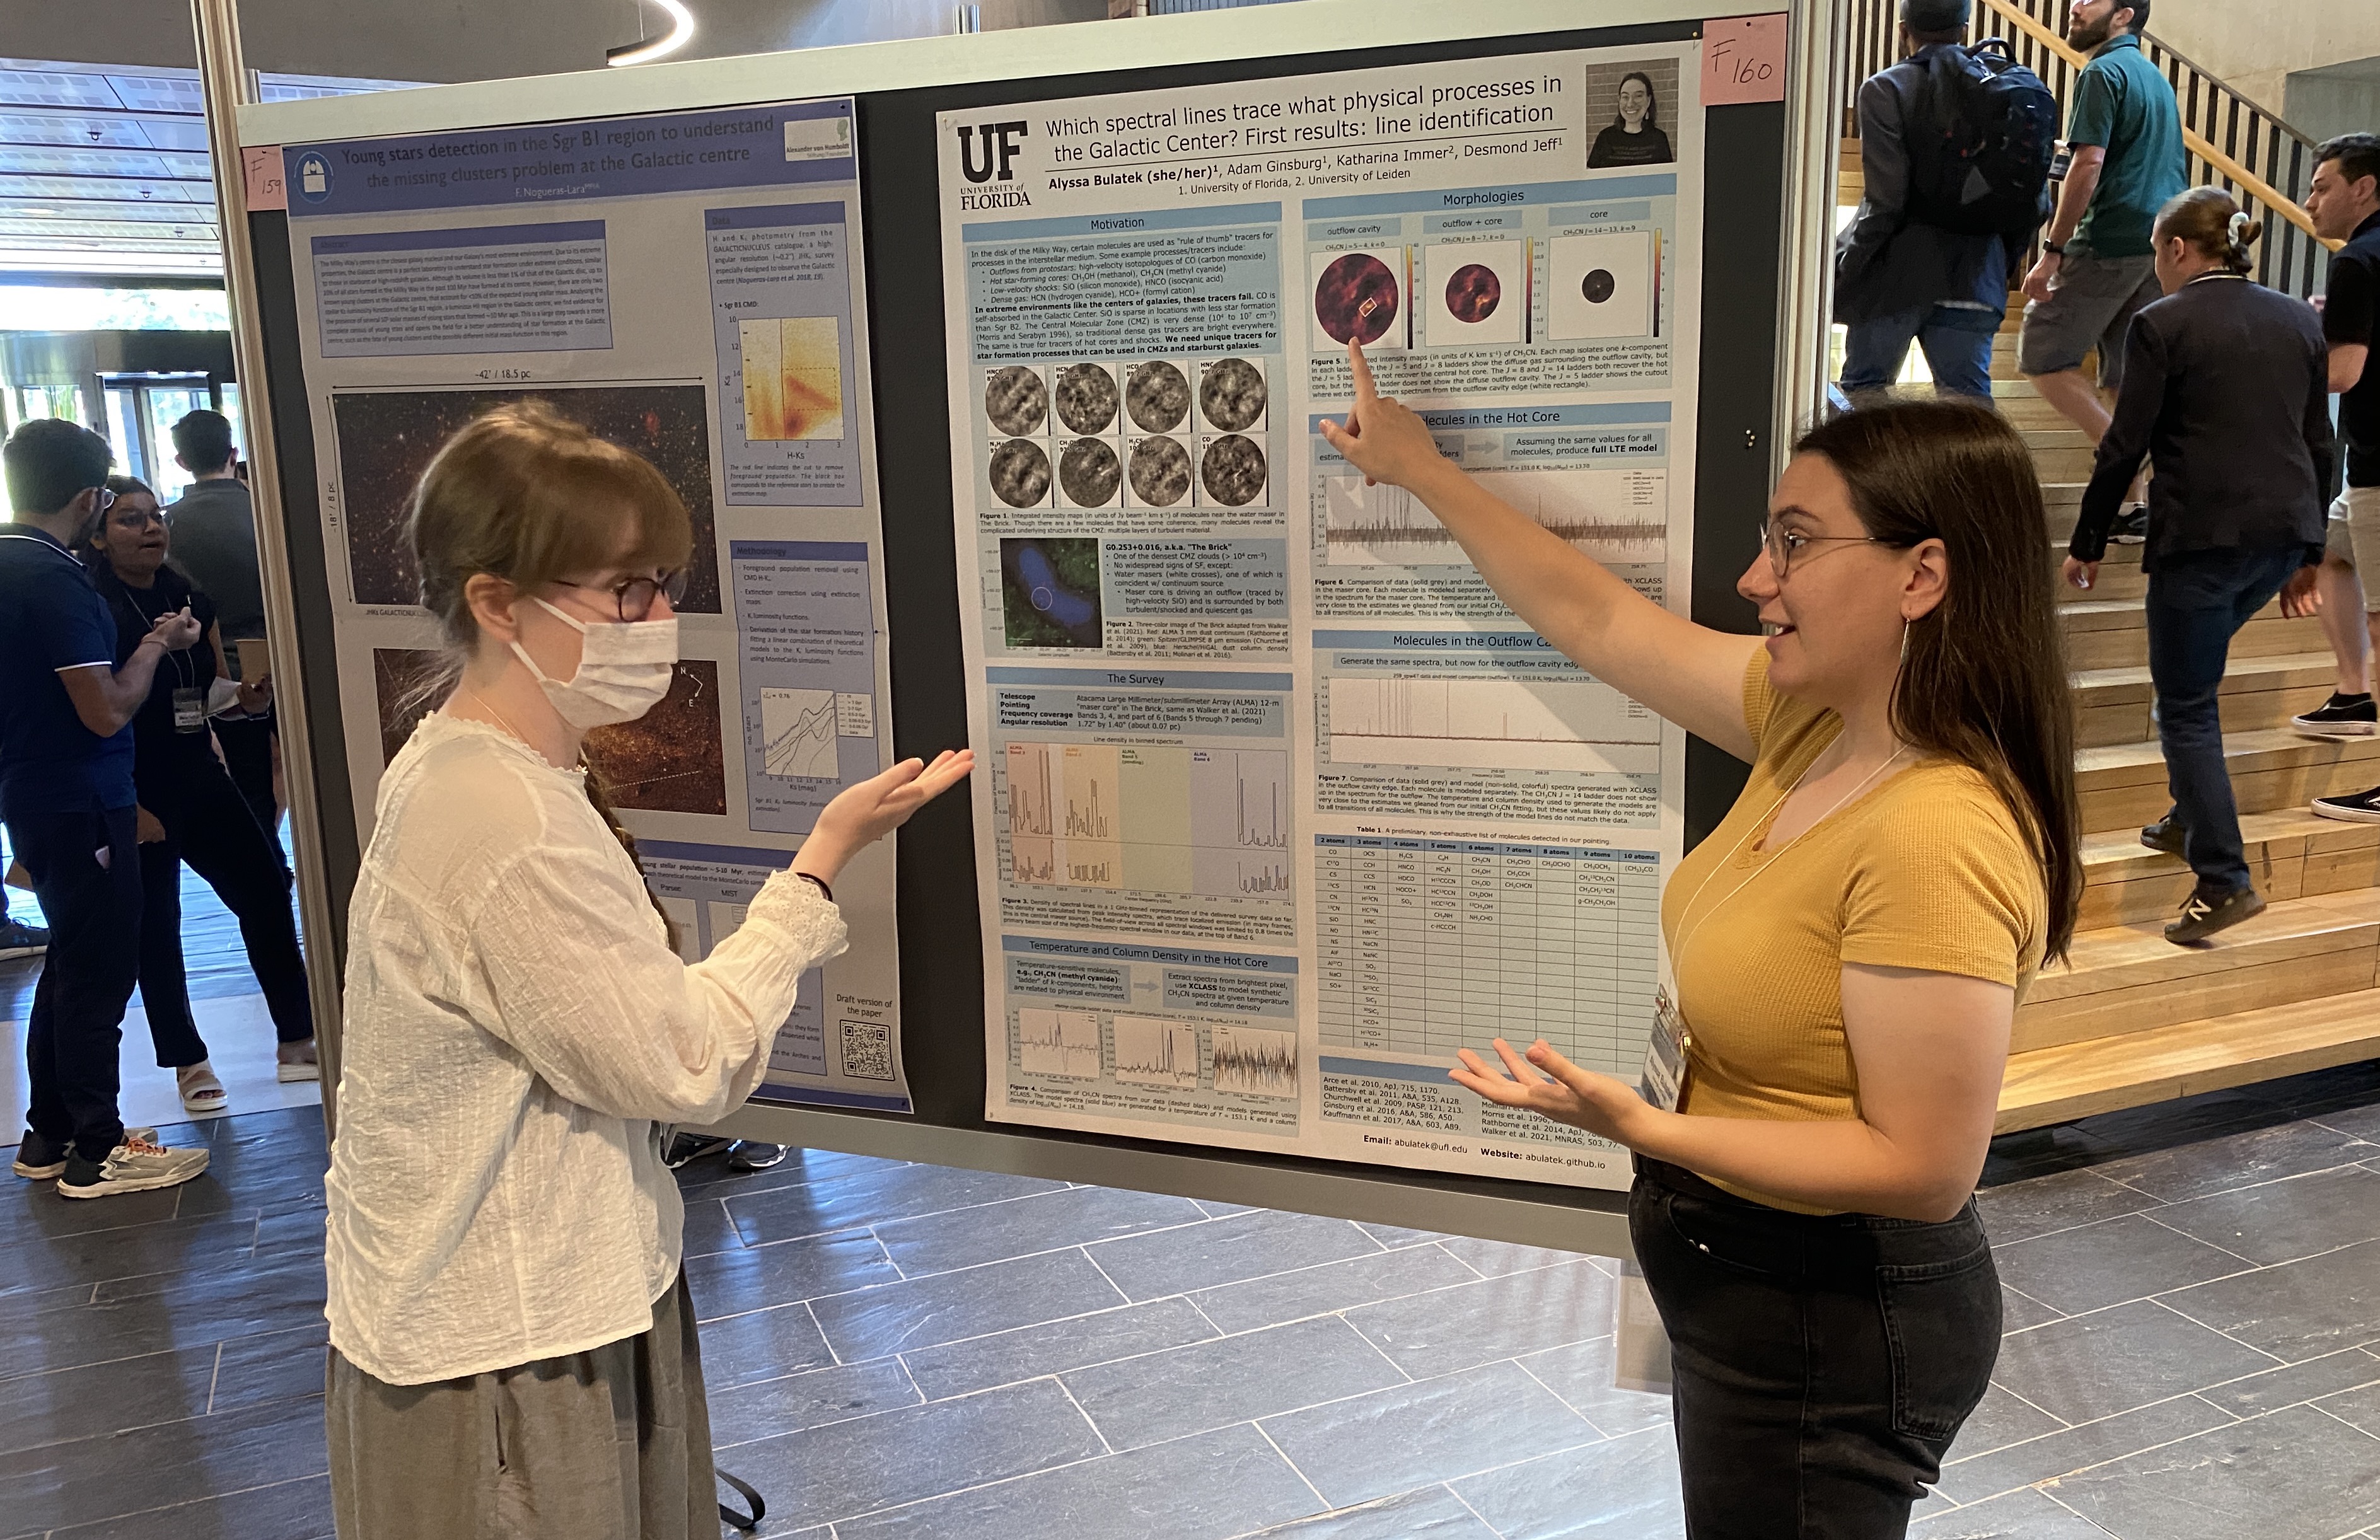 Alyssa presenting her poster at From Stars to Galaxies II